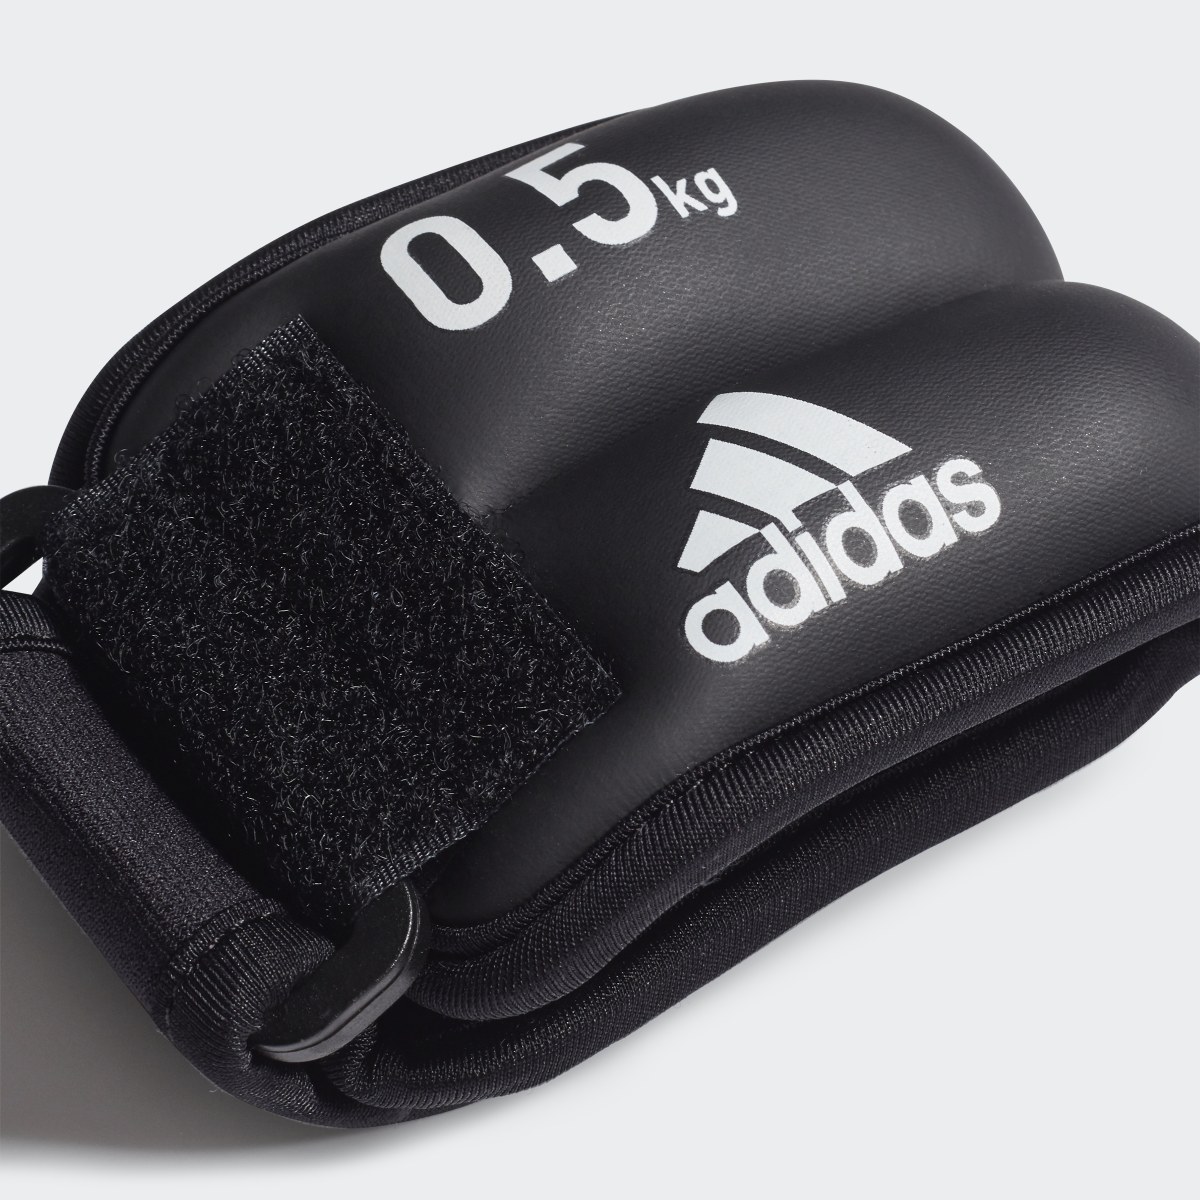 Adidas Ankle / Wrist Weights. 4